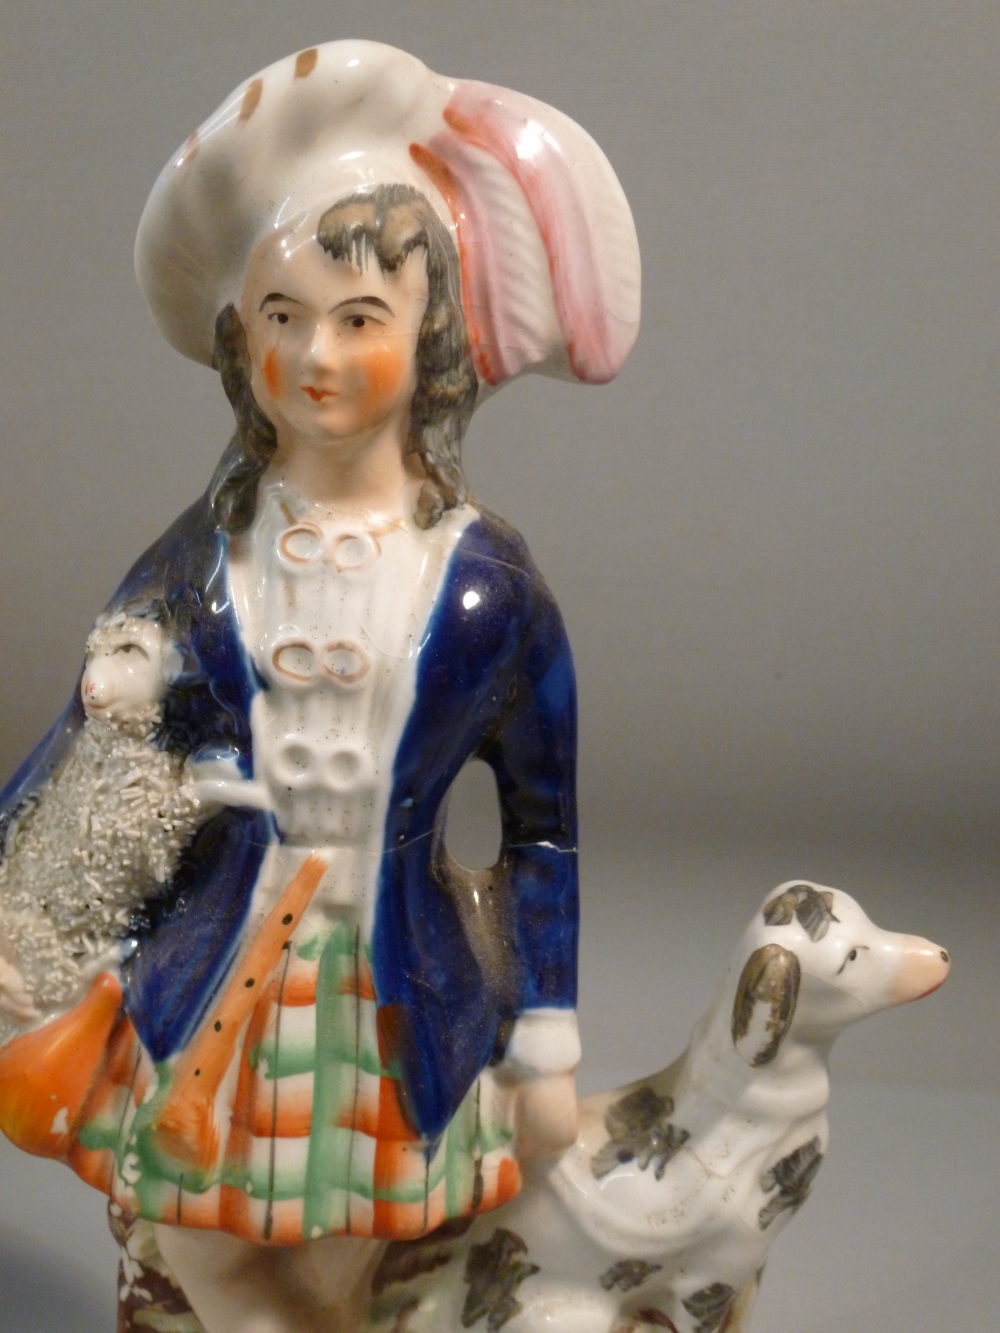 ROYAL DOULTON CHARACTER JUG FROM WILLIAMSBURG BOOTMAKER D6572 COPYRIGHT 1962 (H: 19 cm), A SMALL - Image 4 of 8